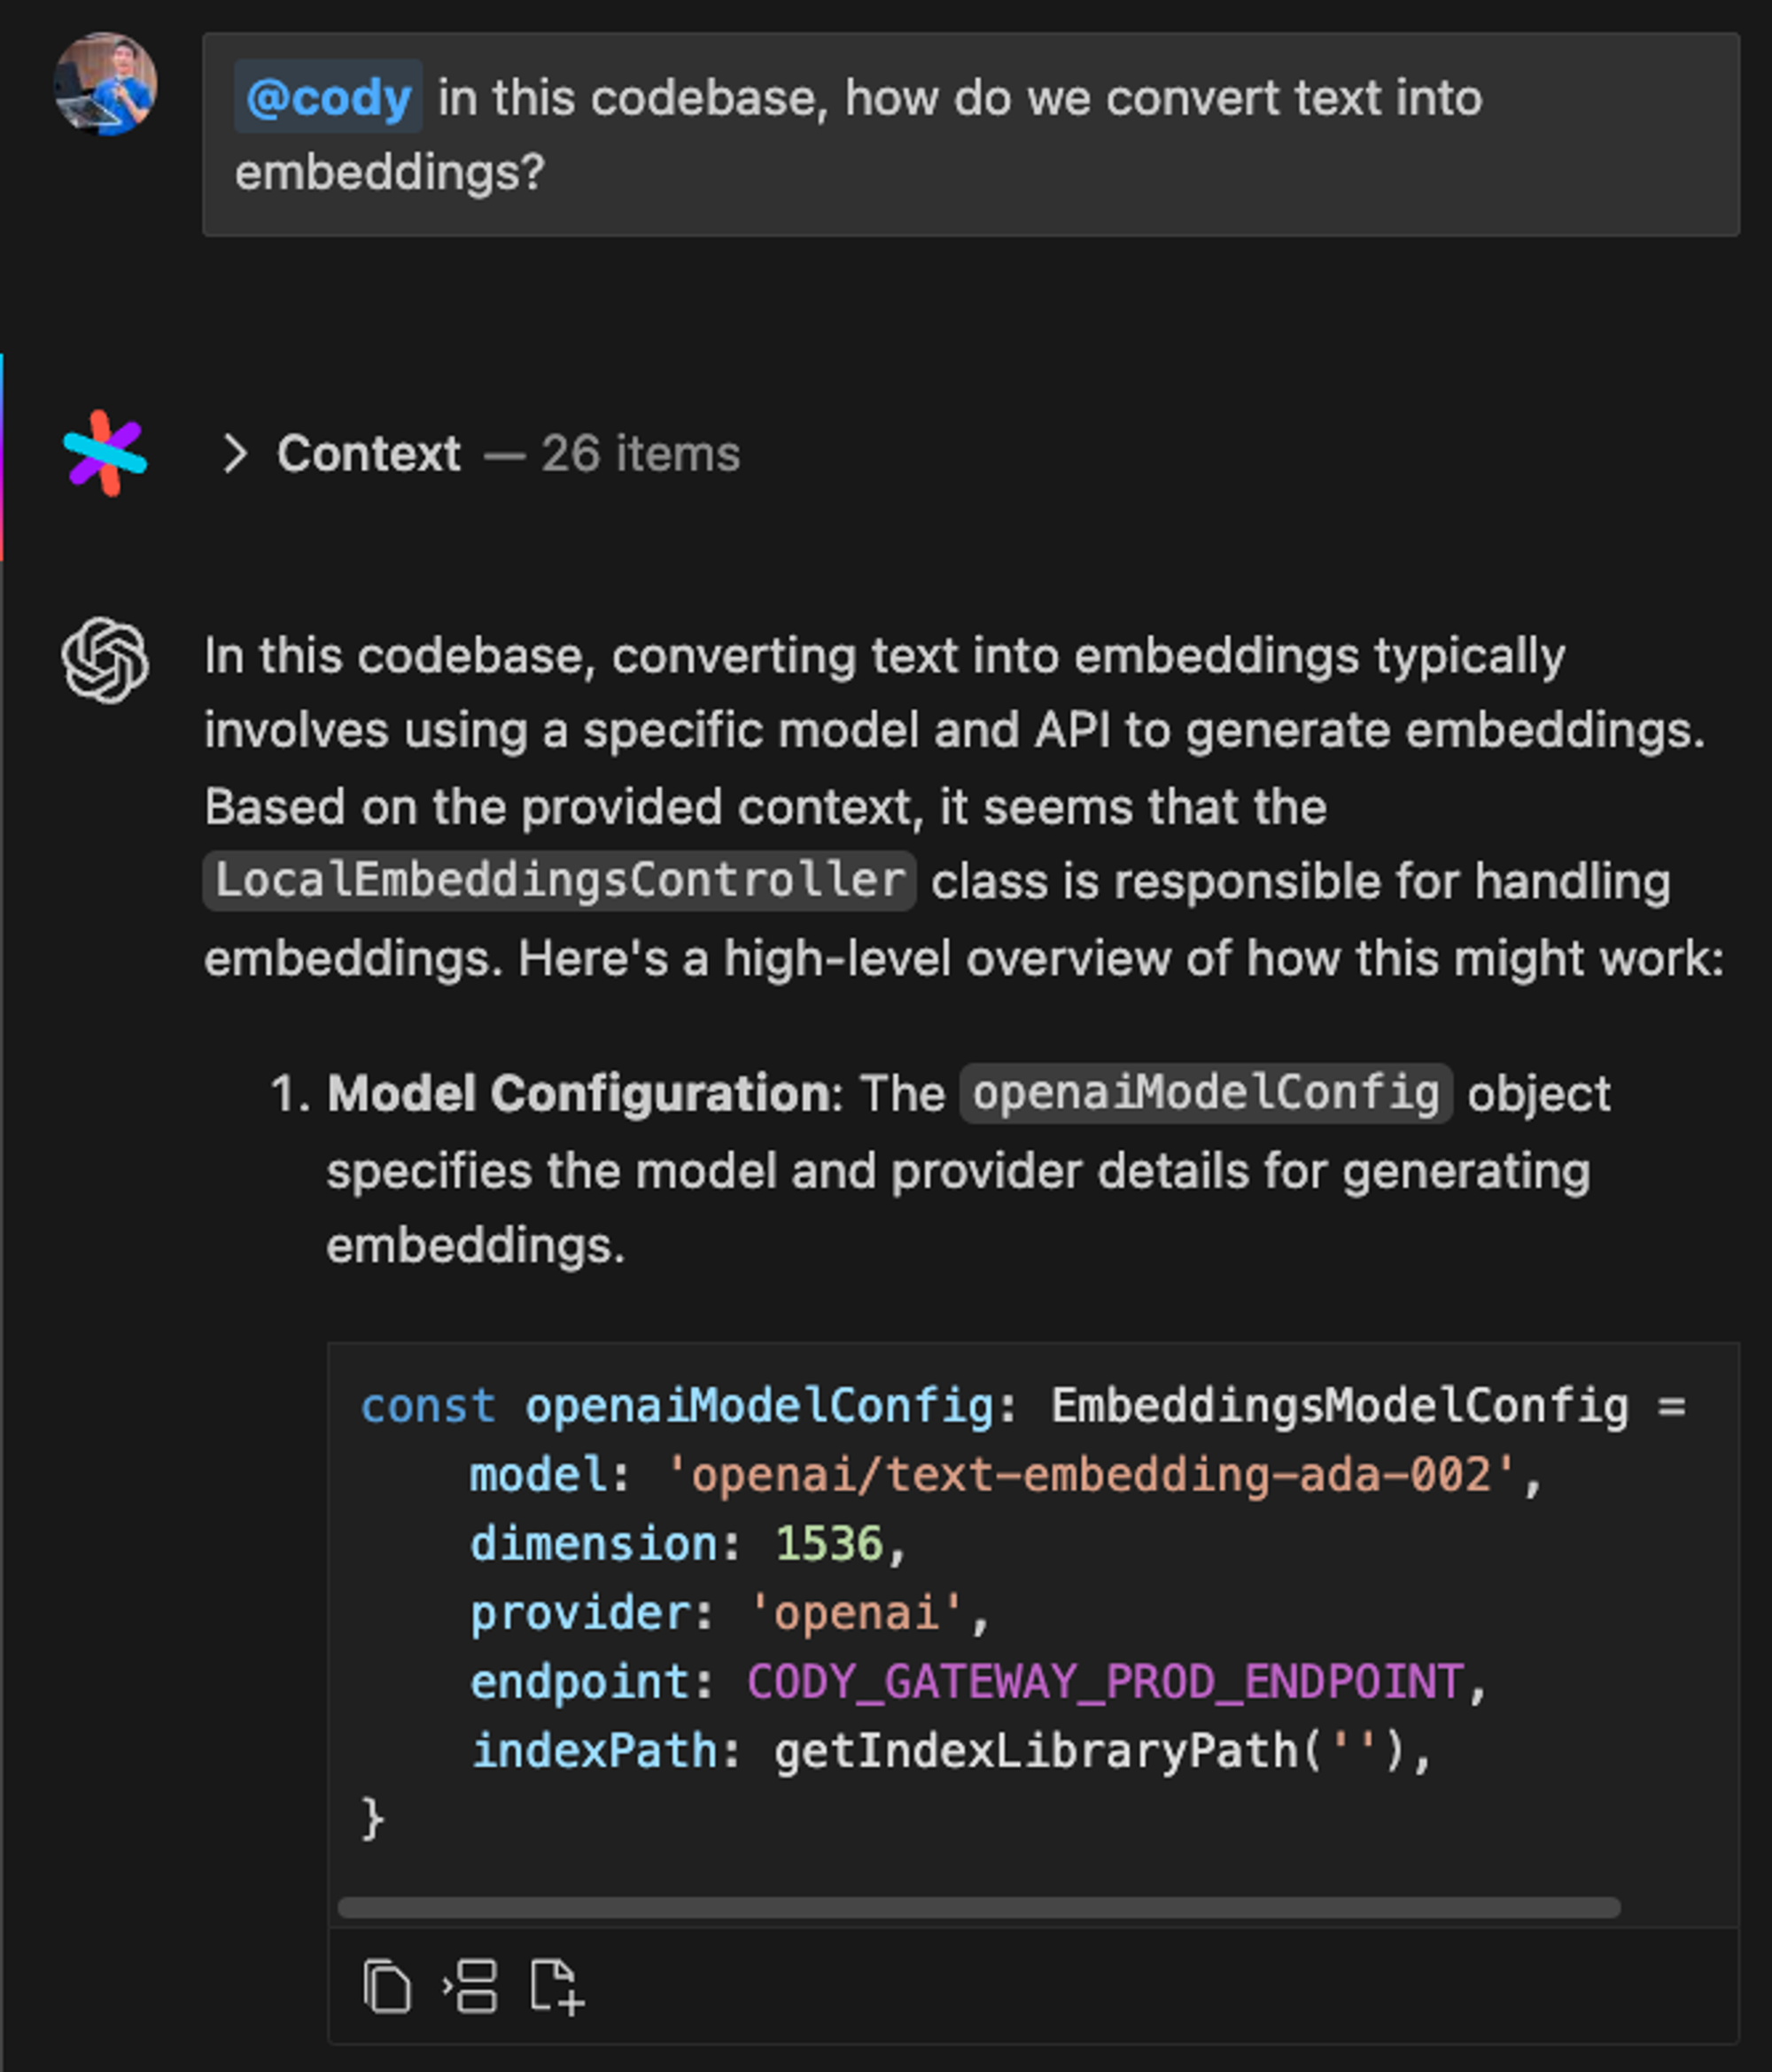 Chat interface showing a question to Cody about converting text into embeddings in the codebase. The response explains the process, involving a specific model and API, managed by the LocalEmbeddingsController class. It highlights model configuration using the openaiModelConfig object, which specifies details like model 'openai/text-embedding-ada-002', dimension 1536, provider 'openai', endpoint CODY_GATEWAY_PROD_ENDPOINT, and indexPath getIndexLibraryPath(''). The interface displays a dark theme with context items and code snippet formatting.